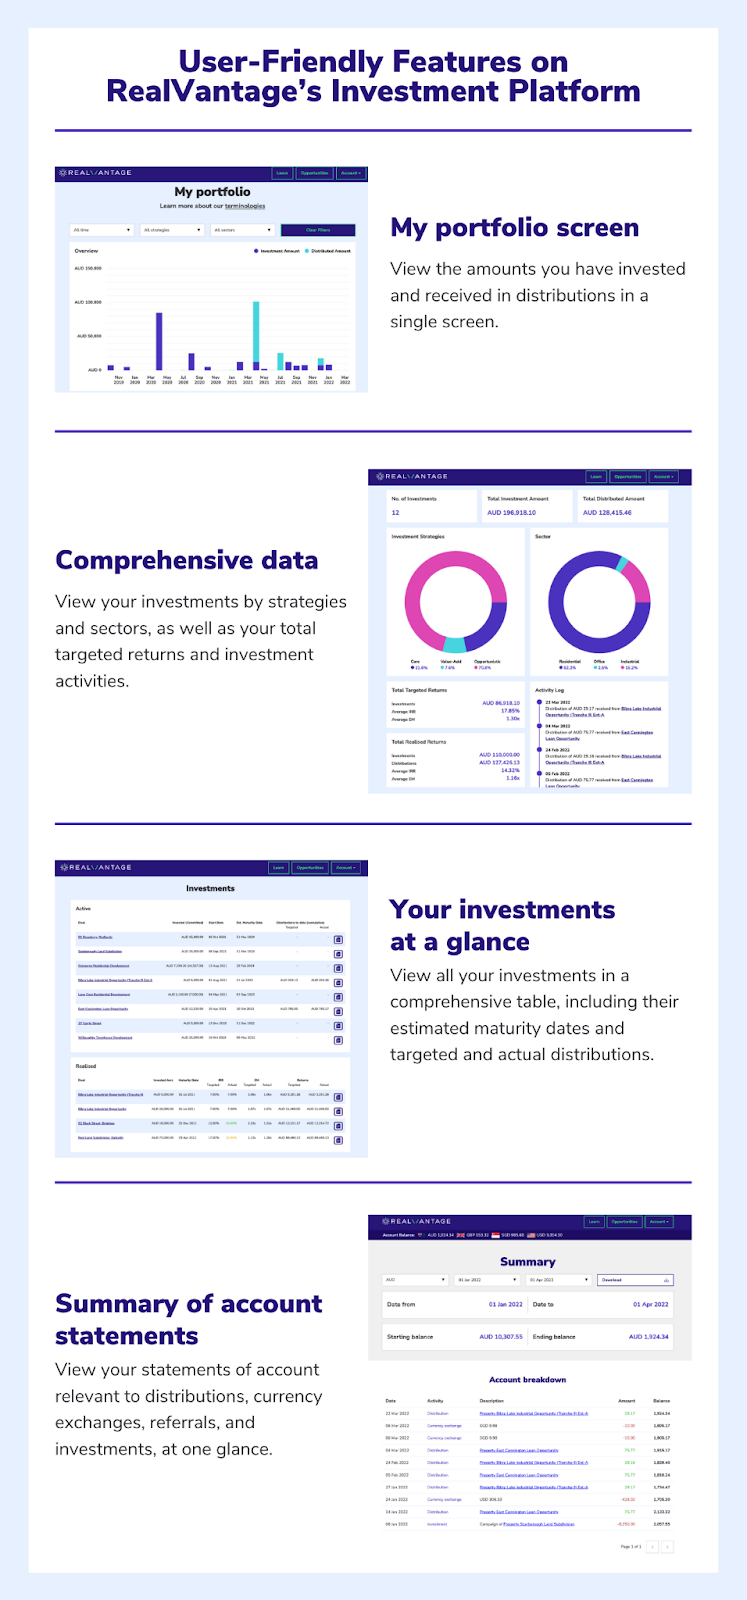 User-Friendly Features on RealVantage’s Investment Platform